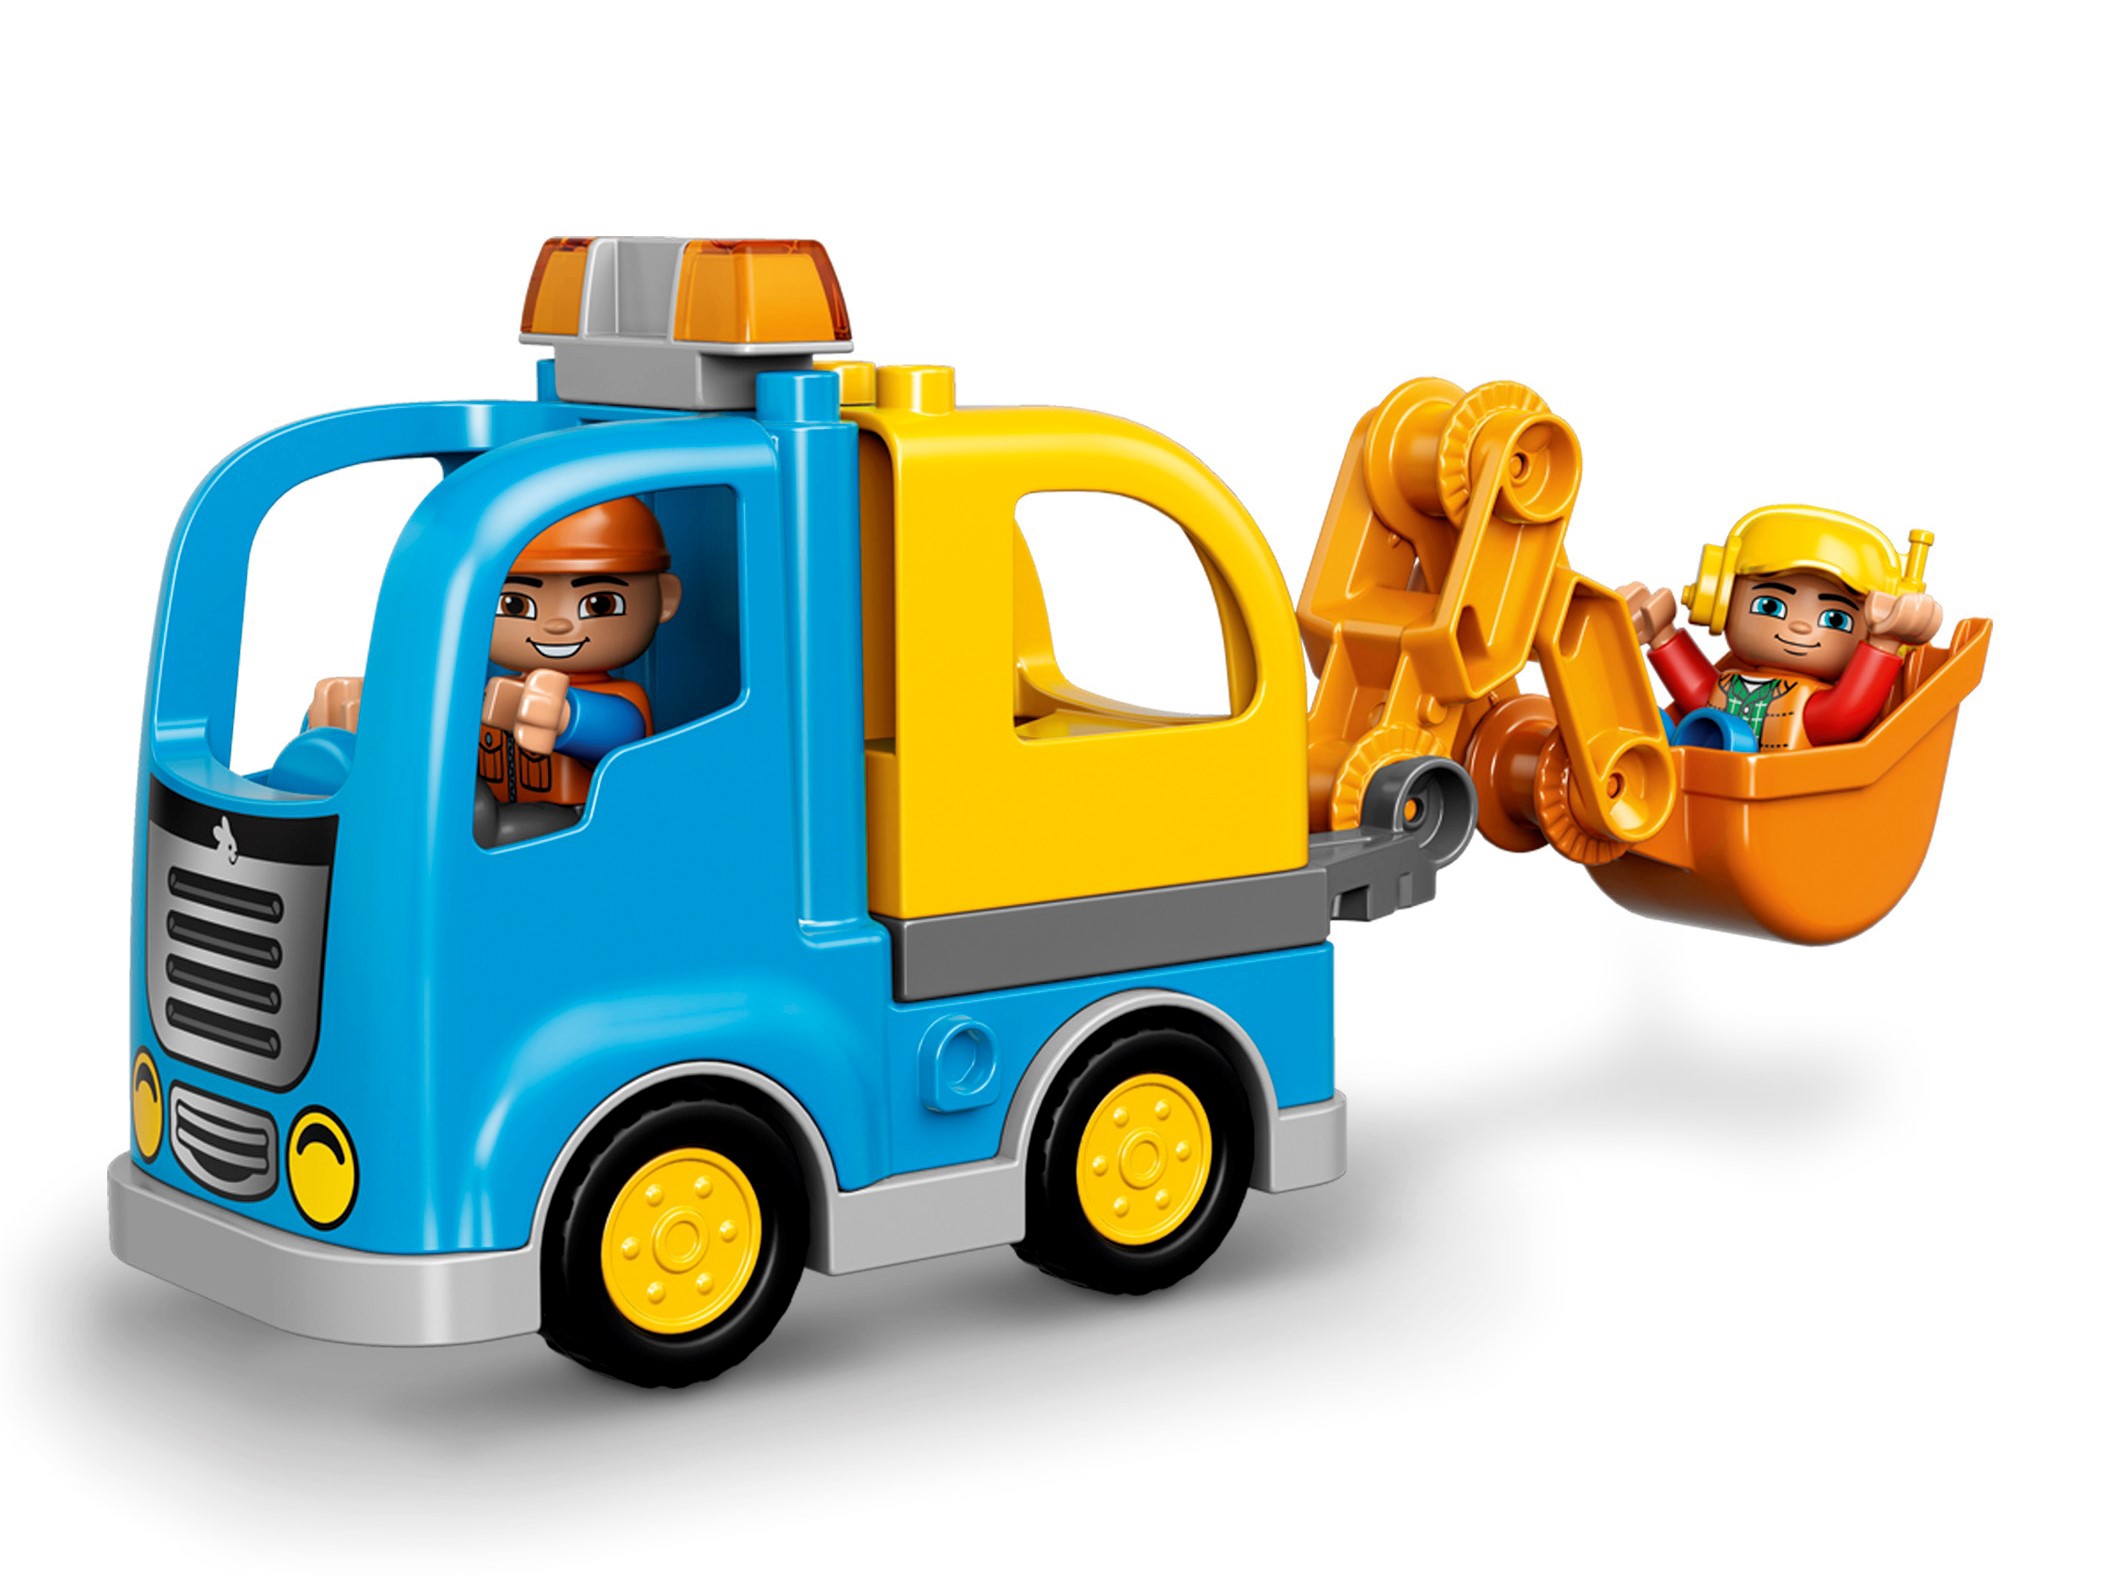  LEGO DUPLO Town Truck & Tracked Excavator Construction